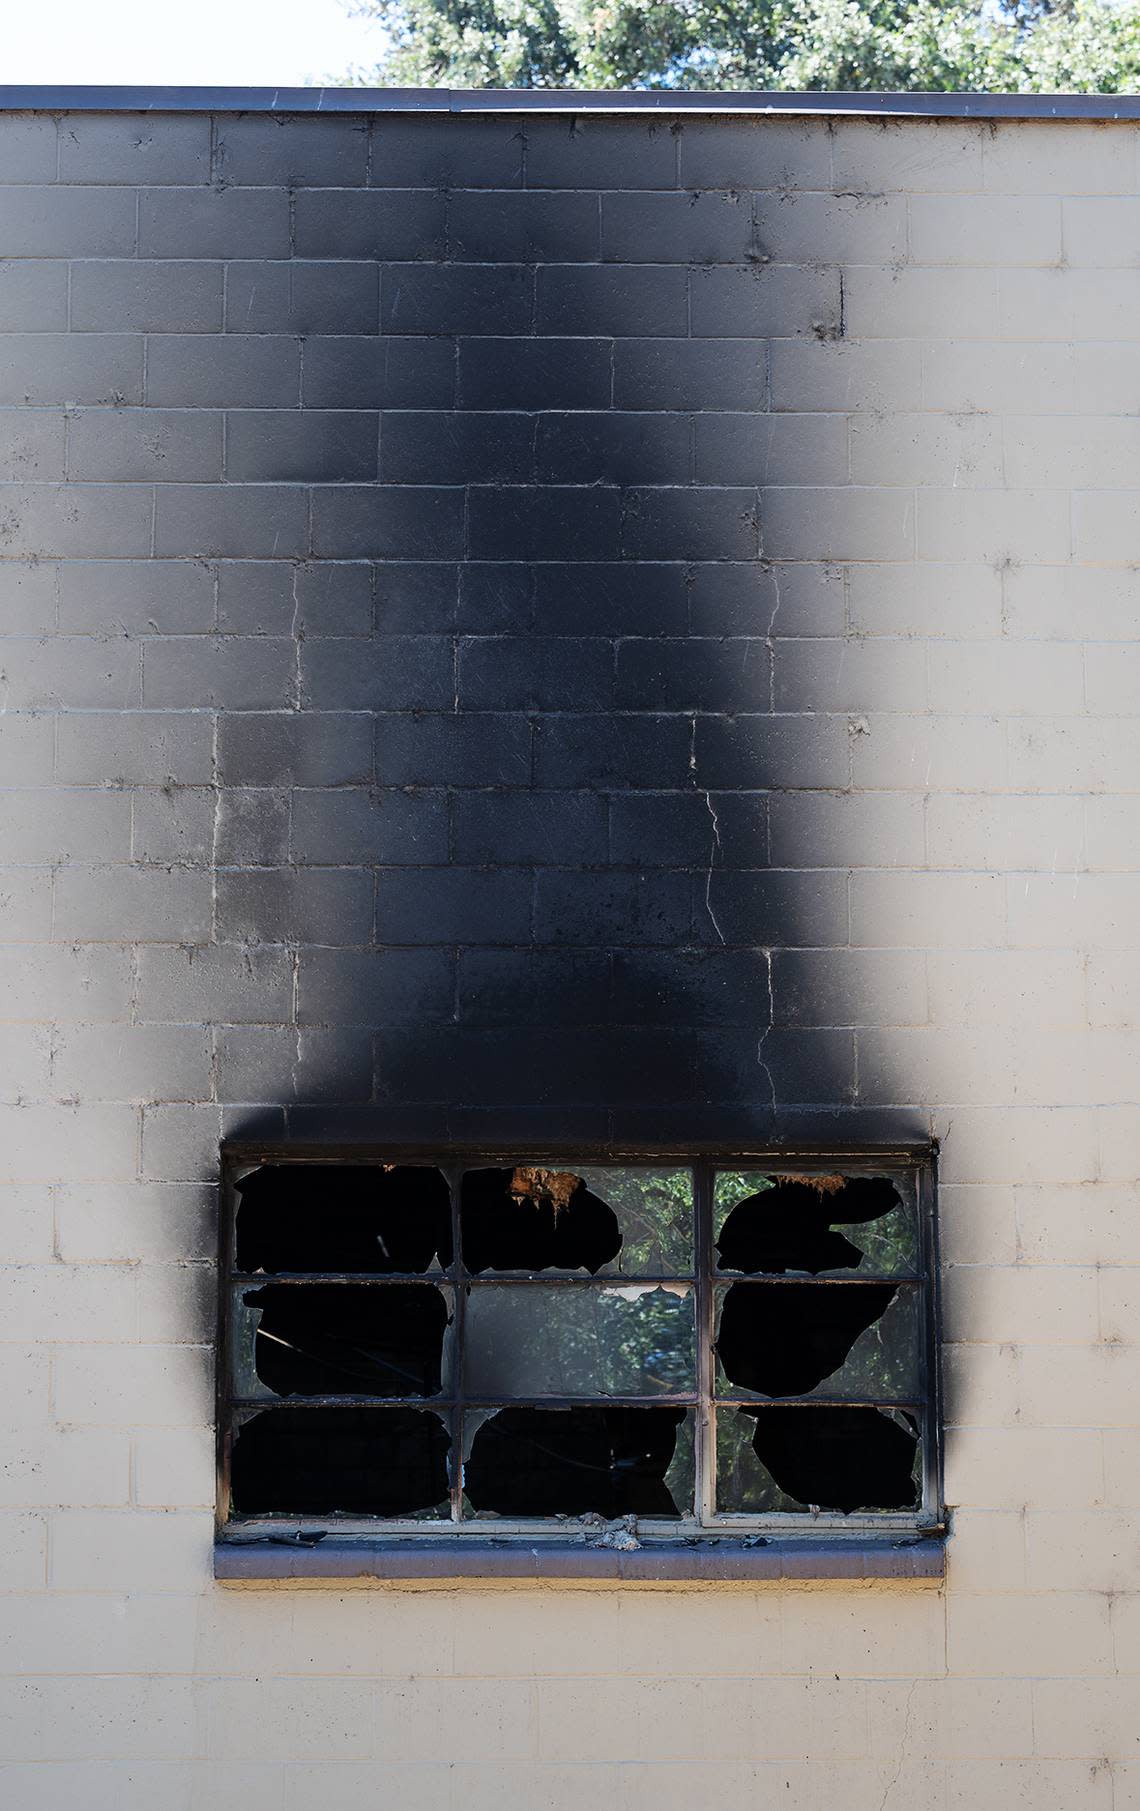 An early morning fire destroyed the American Legion Memorial Hall in Tuolumne River Regional Park in Modesto, Calif., on Thursday, July 21, 2022.